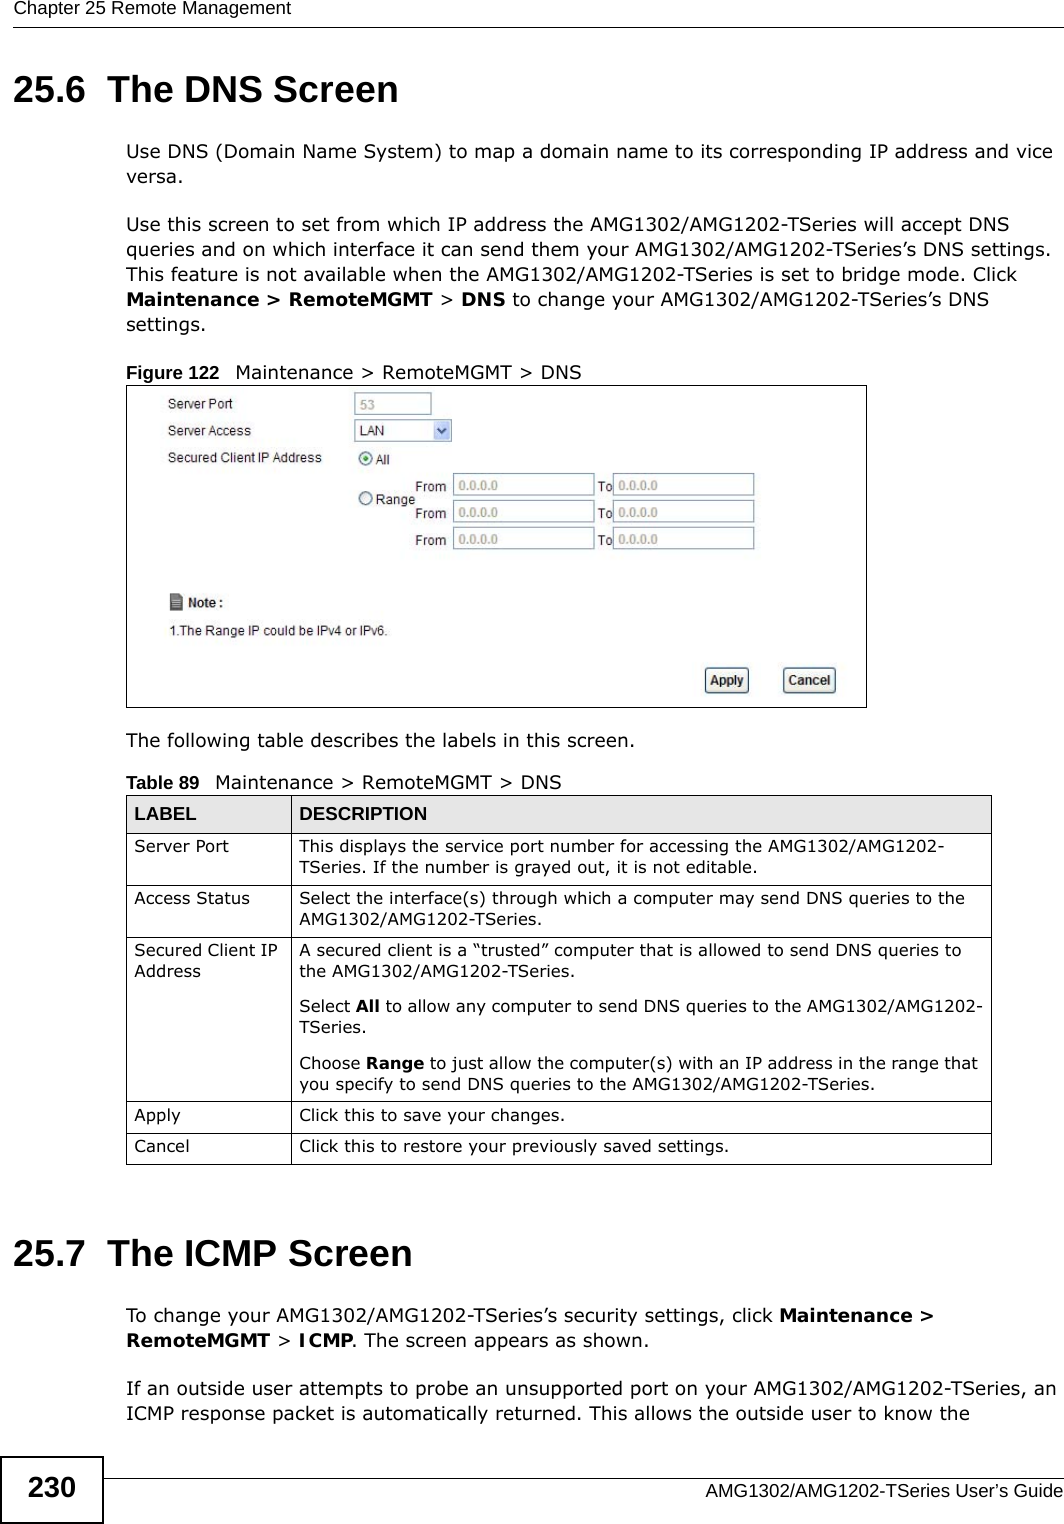 Chapter 25 Remote ManagementAMG1302/AMG1202-TSeries User’s Guide23025.6  The DNS Screen Use DNS (Domain Name System) to map a domain name to its corresponding IP address and vice versa.Use this screen to set from which IP address the AMG1302/AMG1202-TSeries will accept DNS queries and on which interface it can send them your AMG1302/AMG1202-TSeries’s DNS settings. This feature is not available when the AMG1302/AMG1202-TSeries is set to bridge mode. Click Maintenance &gt; RemoteMGMT &gt; DNS to change your AMG1302/AMG1202-TSeries’s DNS settings.Figure 122   Maintenance &gt; RemoteMGMT &gt; DNSThe following table describes the labels in this screen.25.7  The ICMP ScreenTo change your AMG1302/AMG1202-TSeries’s security settings, click Maintenance &gt; RemoteMGMT &gt; ICMP. The screen appears as shown.If an outside user attempts to probe an unsupported port on your AMG1302/AMG1202-TSeries, an ICMP response packet is automatically returned. This allows the outside user to know the Table 89   Maintenance &gt; RemoteMGMT &gt; DNSLABEL DESCRIPTIONServer Port This displays the service port number for accessing the AMG1302/AMG1202-TSeries. If the number is grayed out, it is not editable.Access Status Select the interface(s) through which a computer may send DNS queries to the AMG1302/AMG1202-TSeries.Secured Client IP AddressA secured client is a “trusted” computer that is allowed to send DNS queries to the AMG1302/AMG1202-TSeries.Select All to allow any computer to send DNS queries to the AMG1302/AMG1202-TSeries.Choose Range to just allow the computer(s) with an IP address in the range that you specify to send DNS queries to the AMG1302/AMG1202-TSeries.Apply Click this to save your changes.Cancel Click this to restore your previously saved settings.